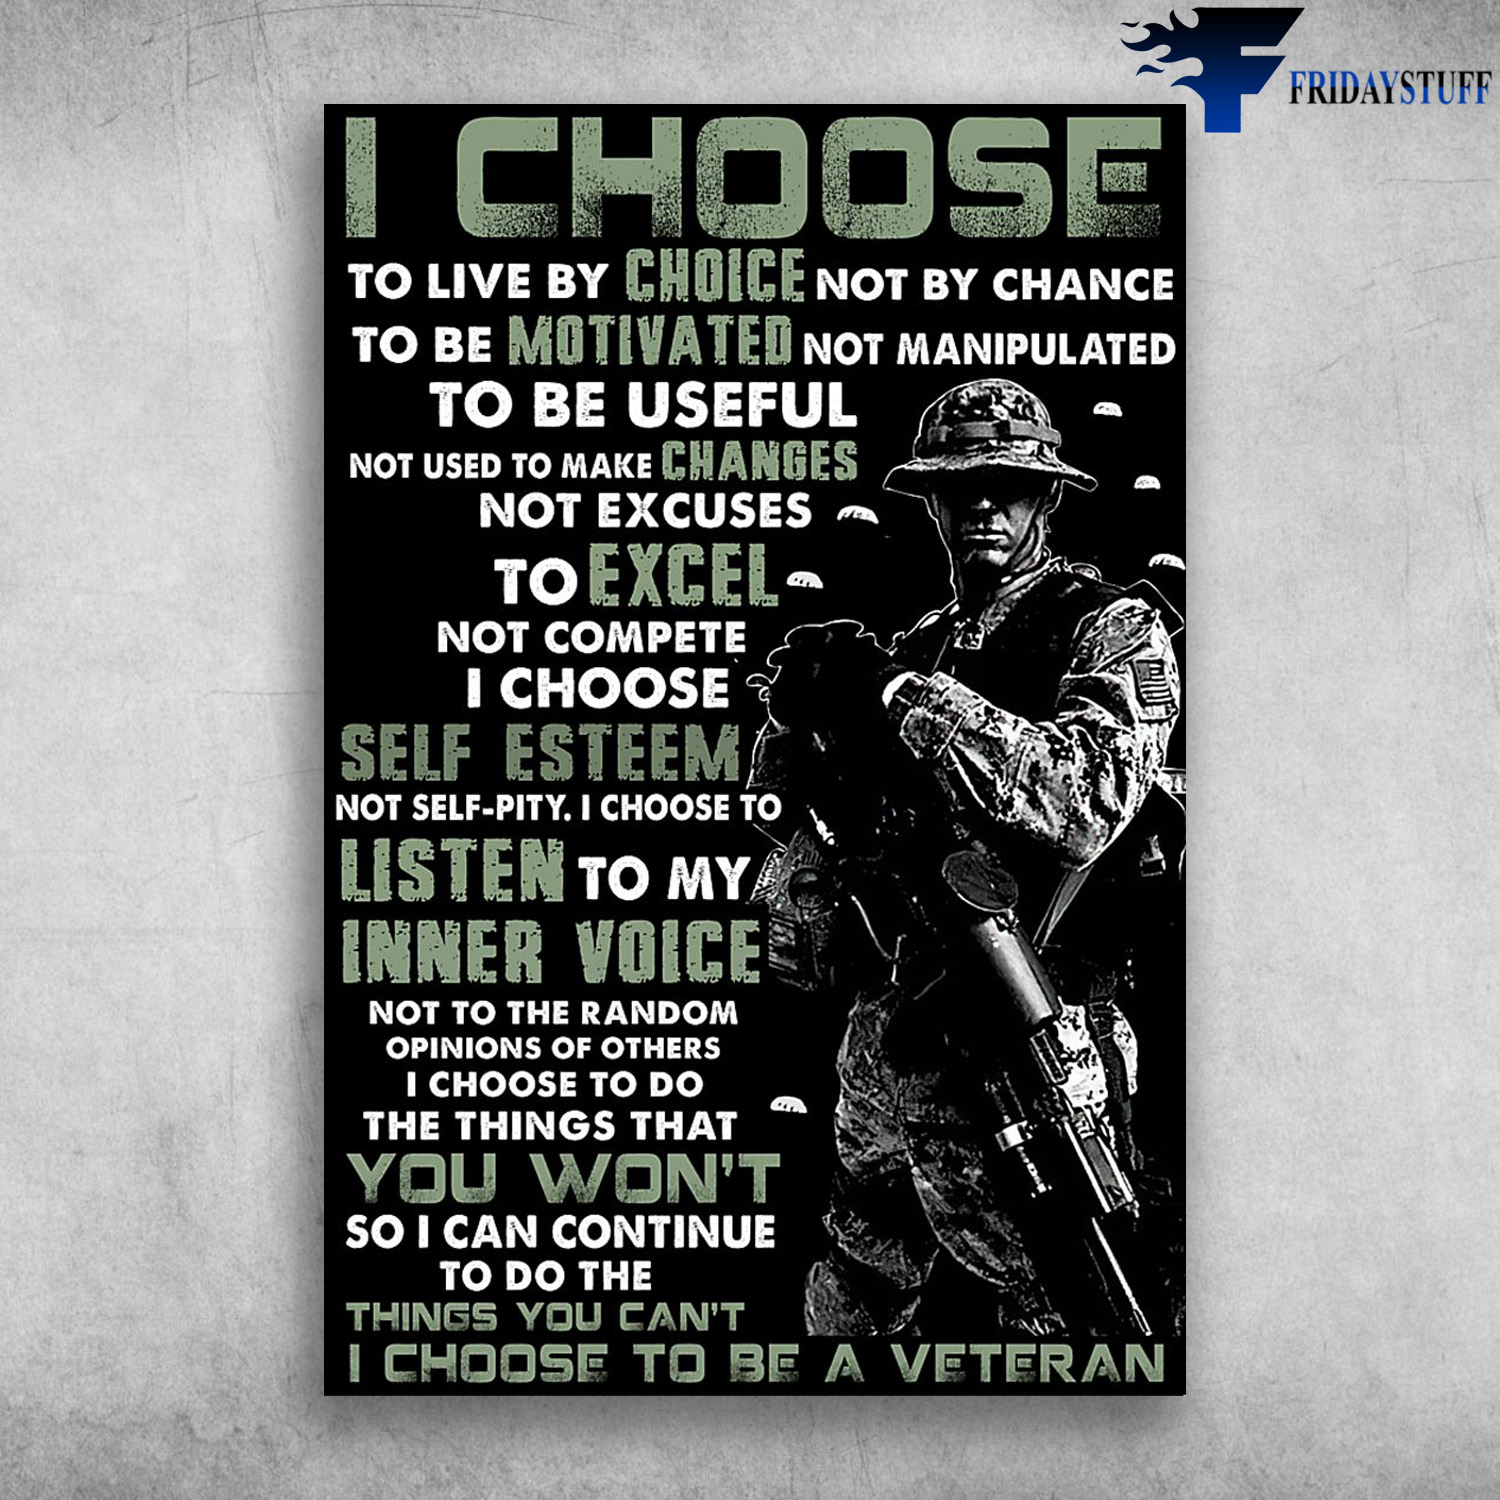 USA Veteran - I Choose To Live By Choice Not By Chance, To Be Motivated Not Manipulated, To Be Useful, Not Used To Make Changes, Not Excuses, To Excel, Not Complete, I Choose Self Esteem